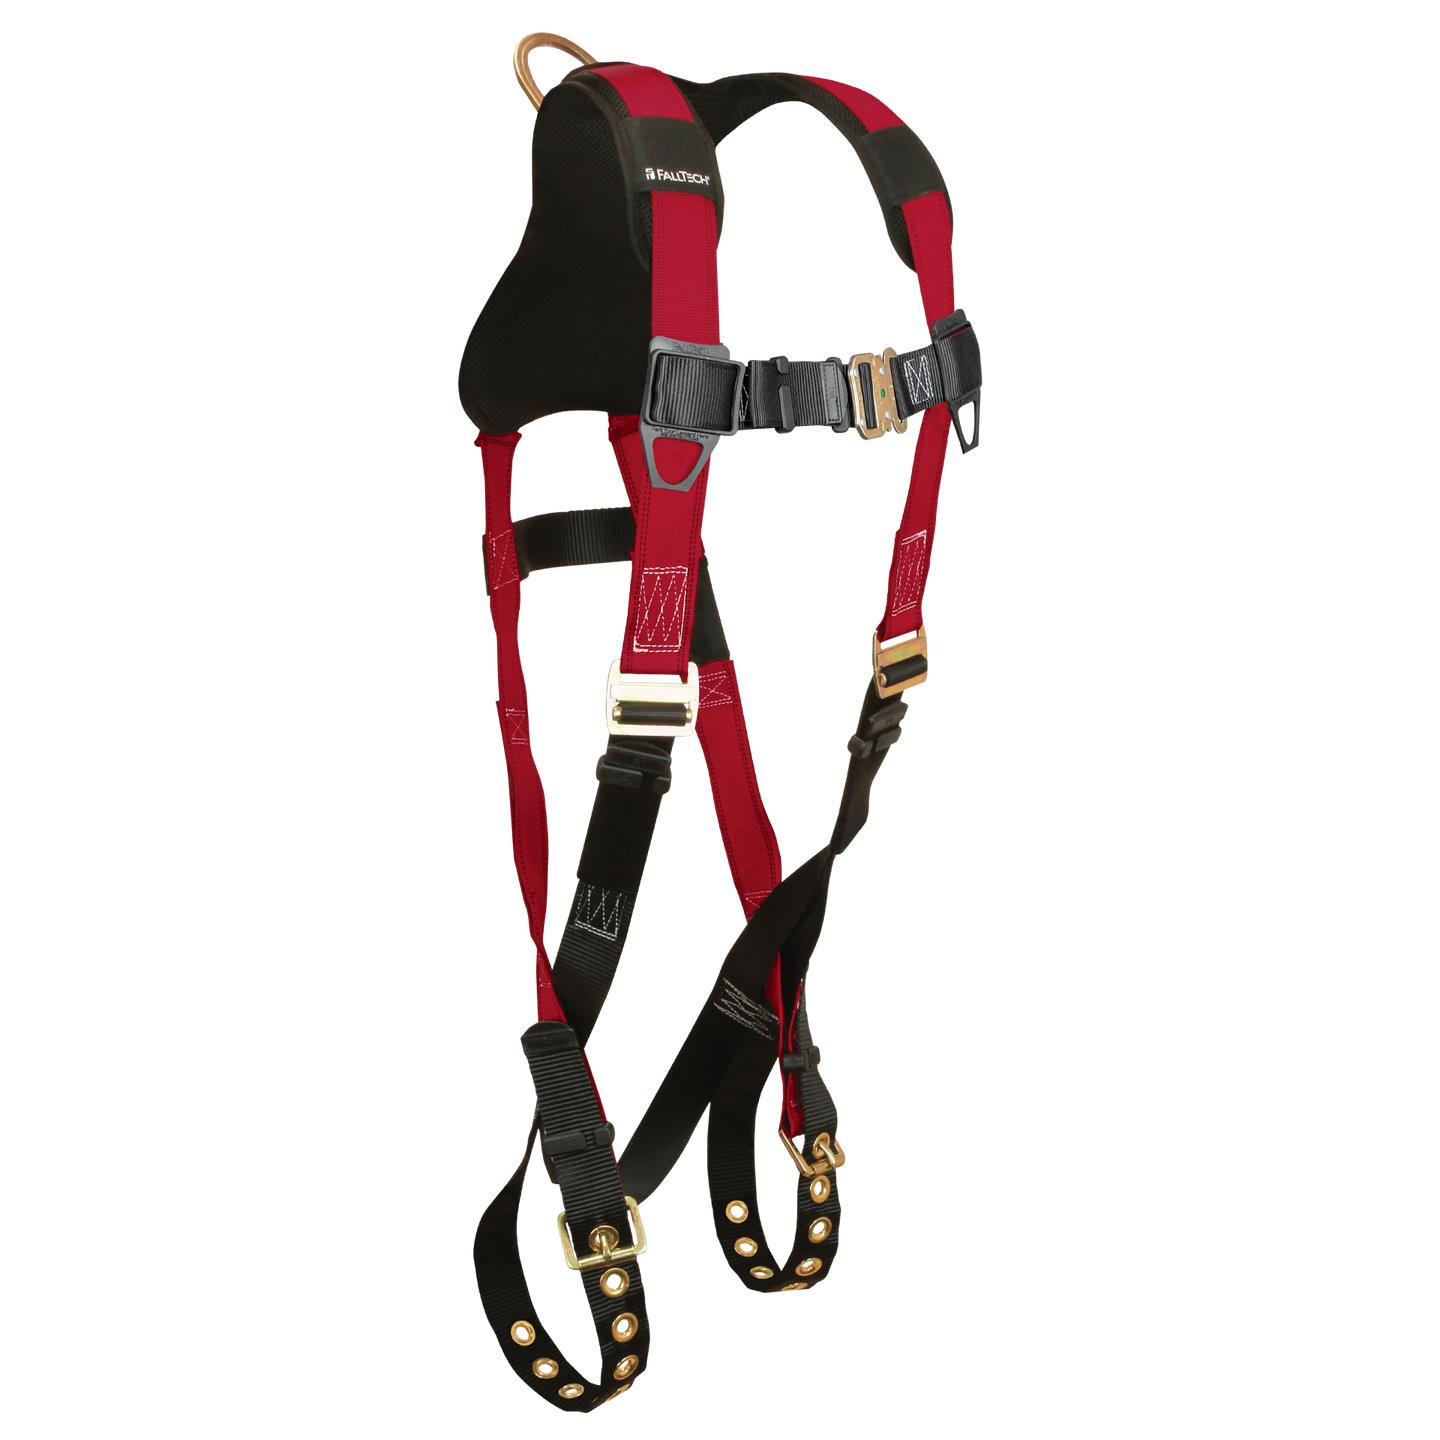 Tradesman® Plus Non-Belted Harness